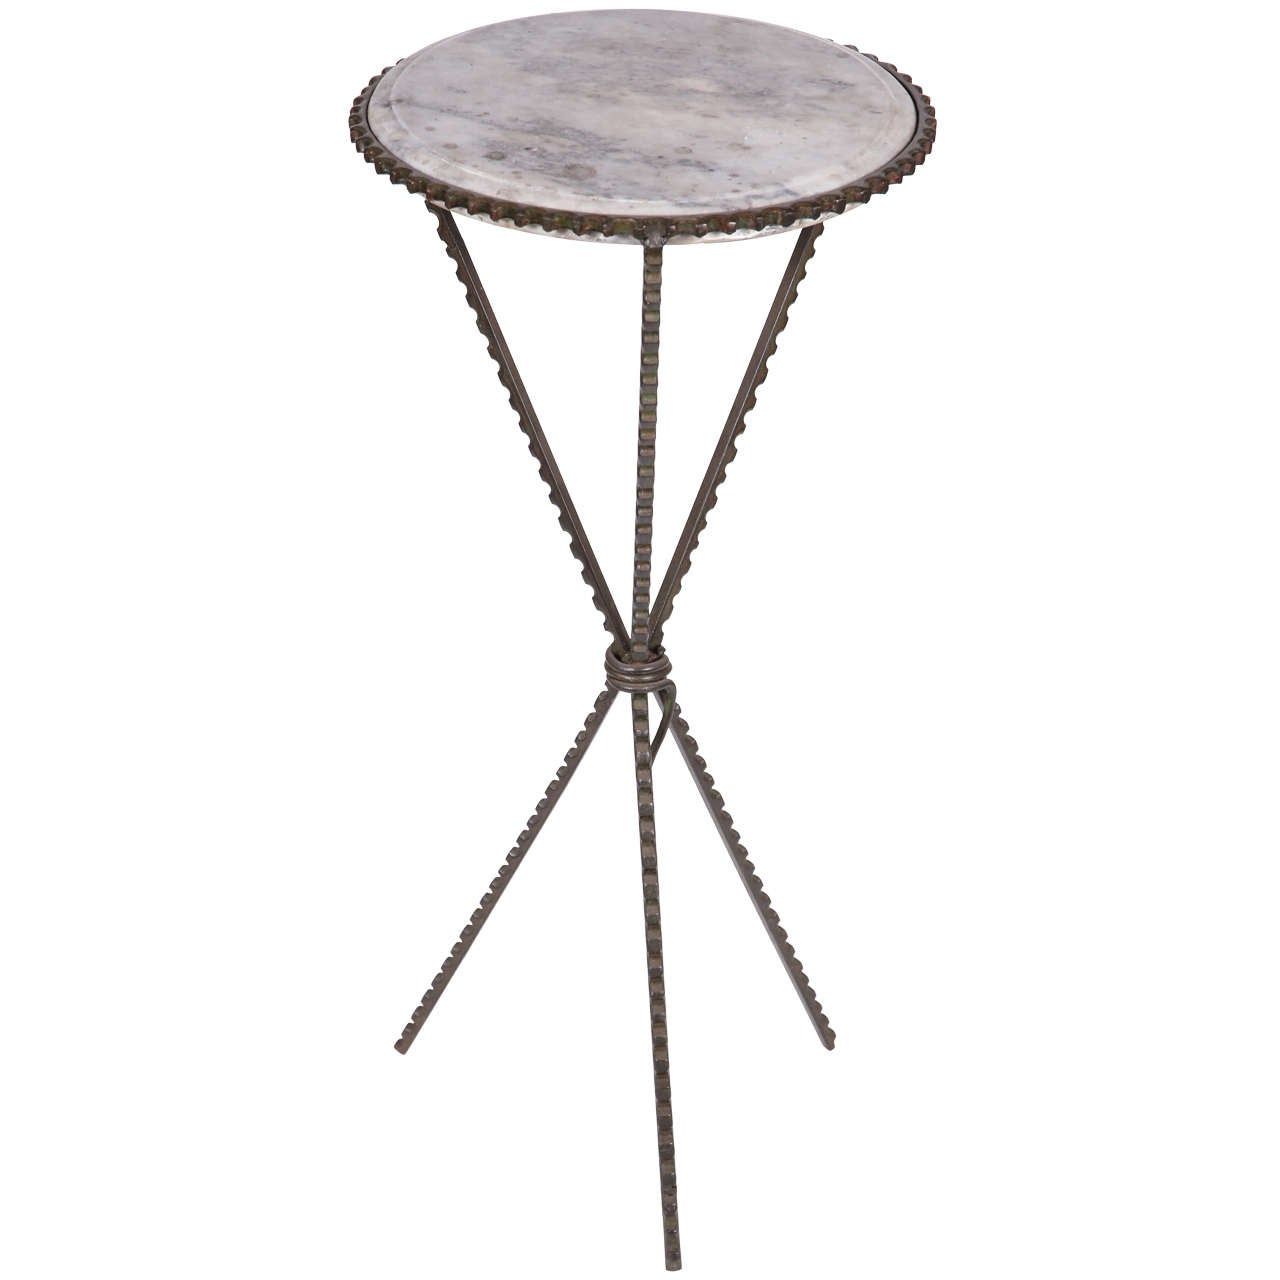 Pair Of Wrought Iron Round End Tables With Marble Tops At 1stdibs With Regard To Iron And White Marble Desks (View 10 of 15)